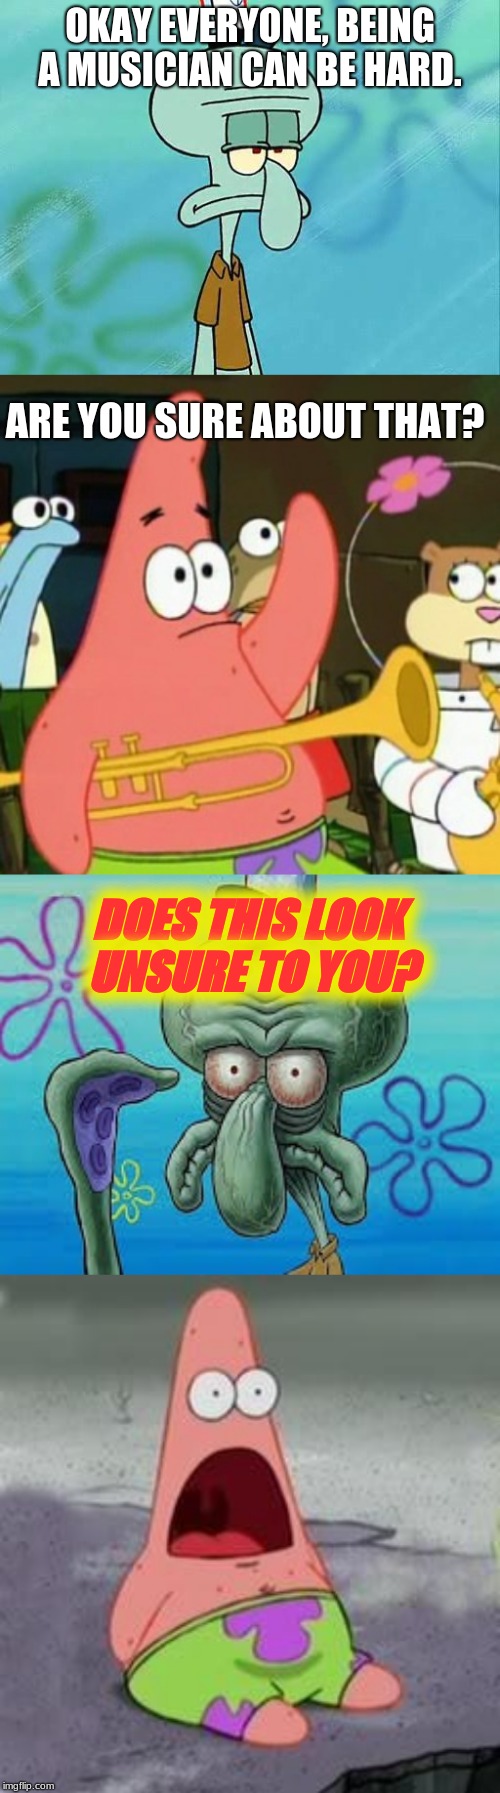 OKAY EVERYONE, BEING A MUSICIAN CAN BE HARD. ARE YOU SURE ABOUT THAT? DOES THIS LOOK UNSURE TO YOU? | image tagged in memes,no patrick,squidward,suprised patrick,does this look unsure to you | made w/ Imgflip meme maker